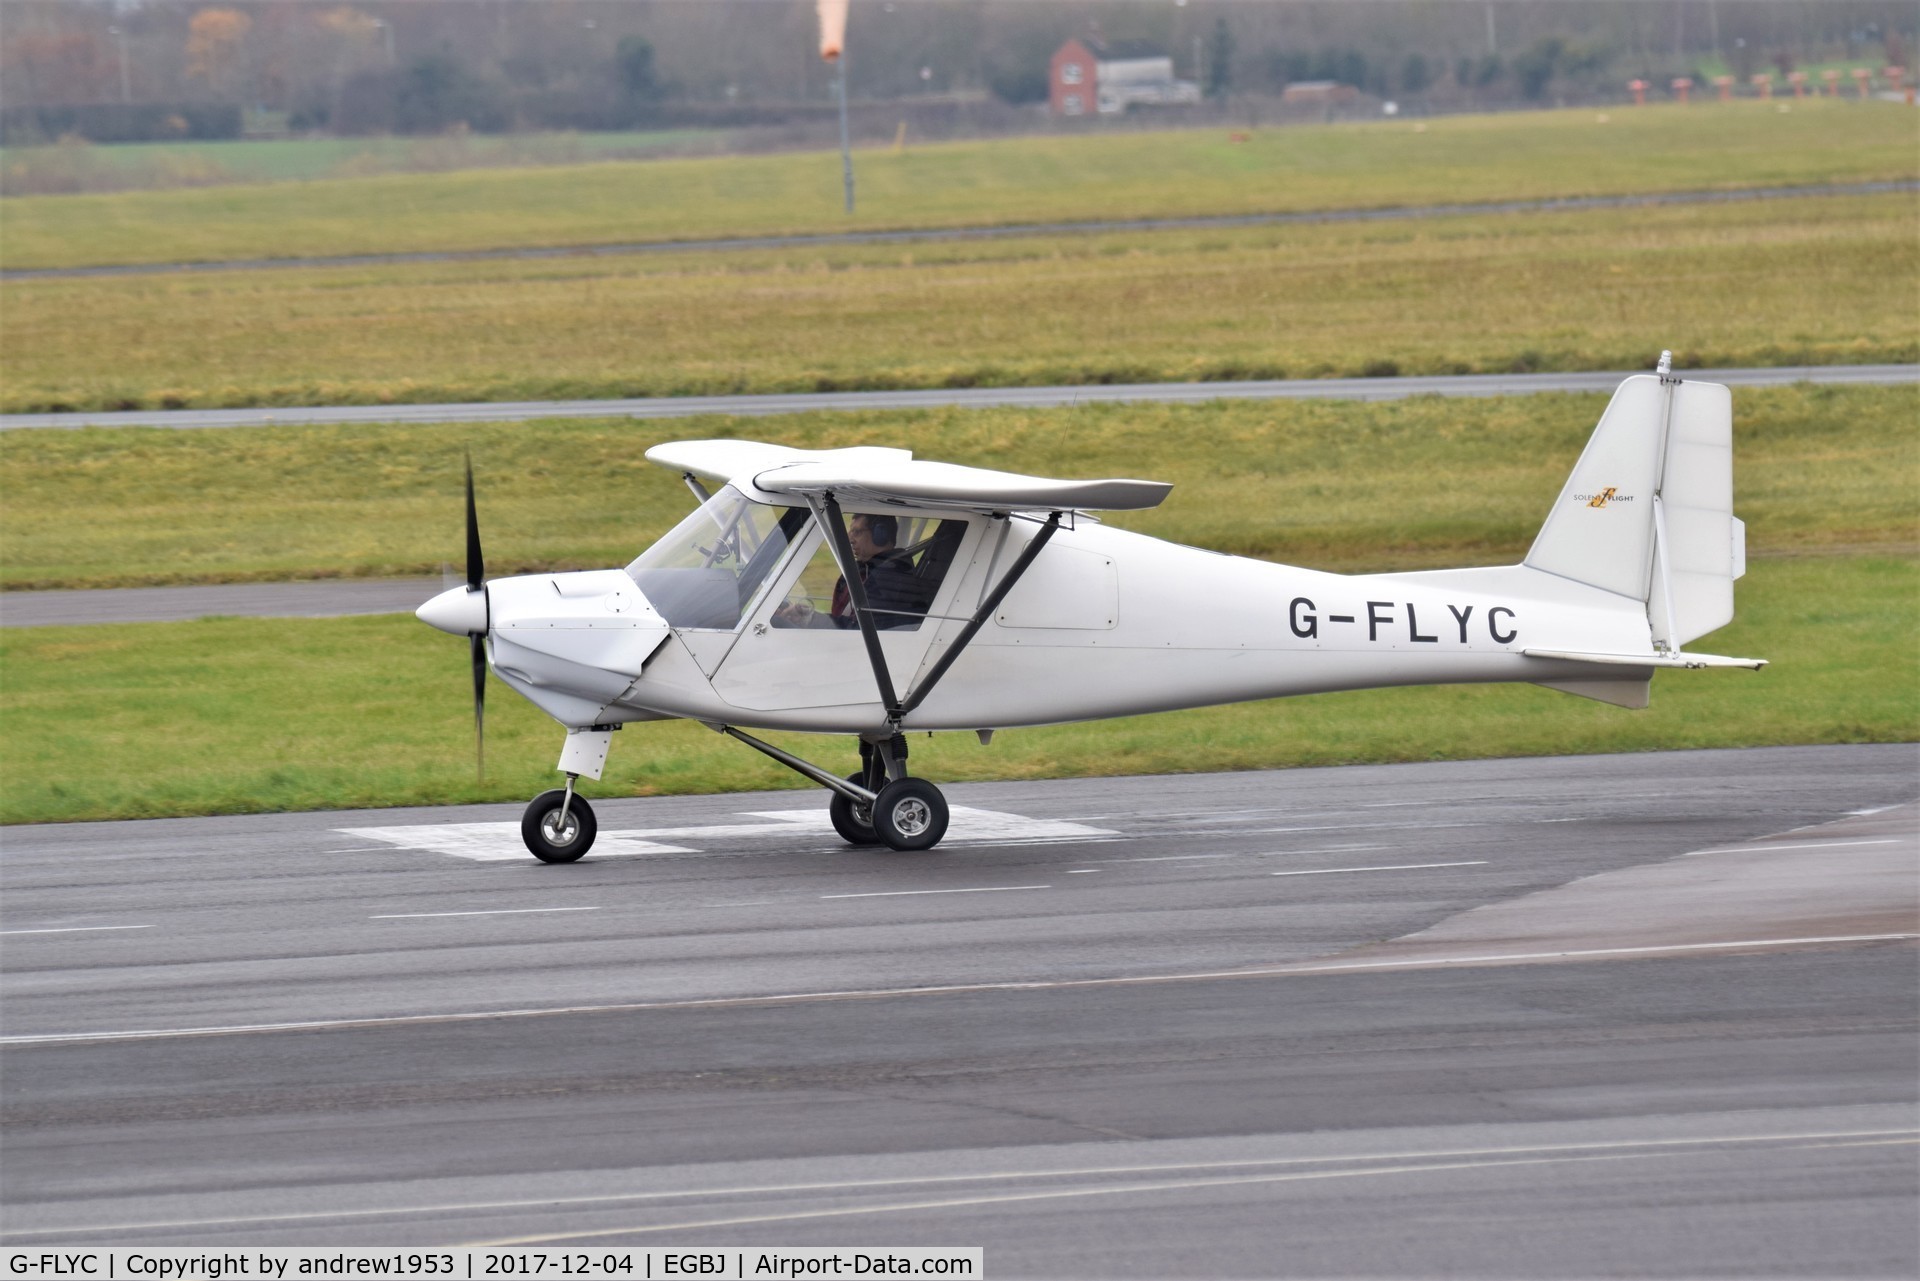 G-FLYC, 2005 Comco Ikarus C42 FB100 C/N 0503-6656, G-FLYC at Gloucestershire Airport.